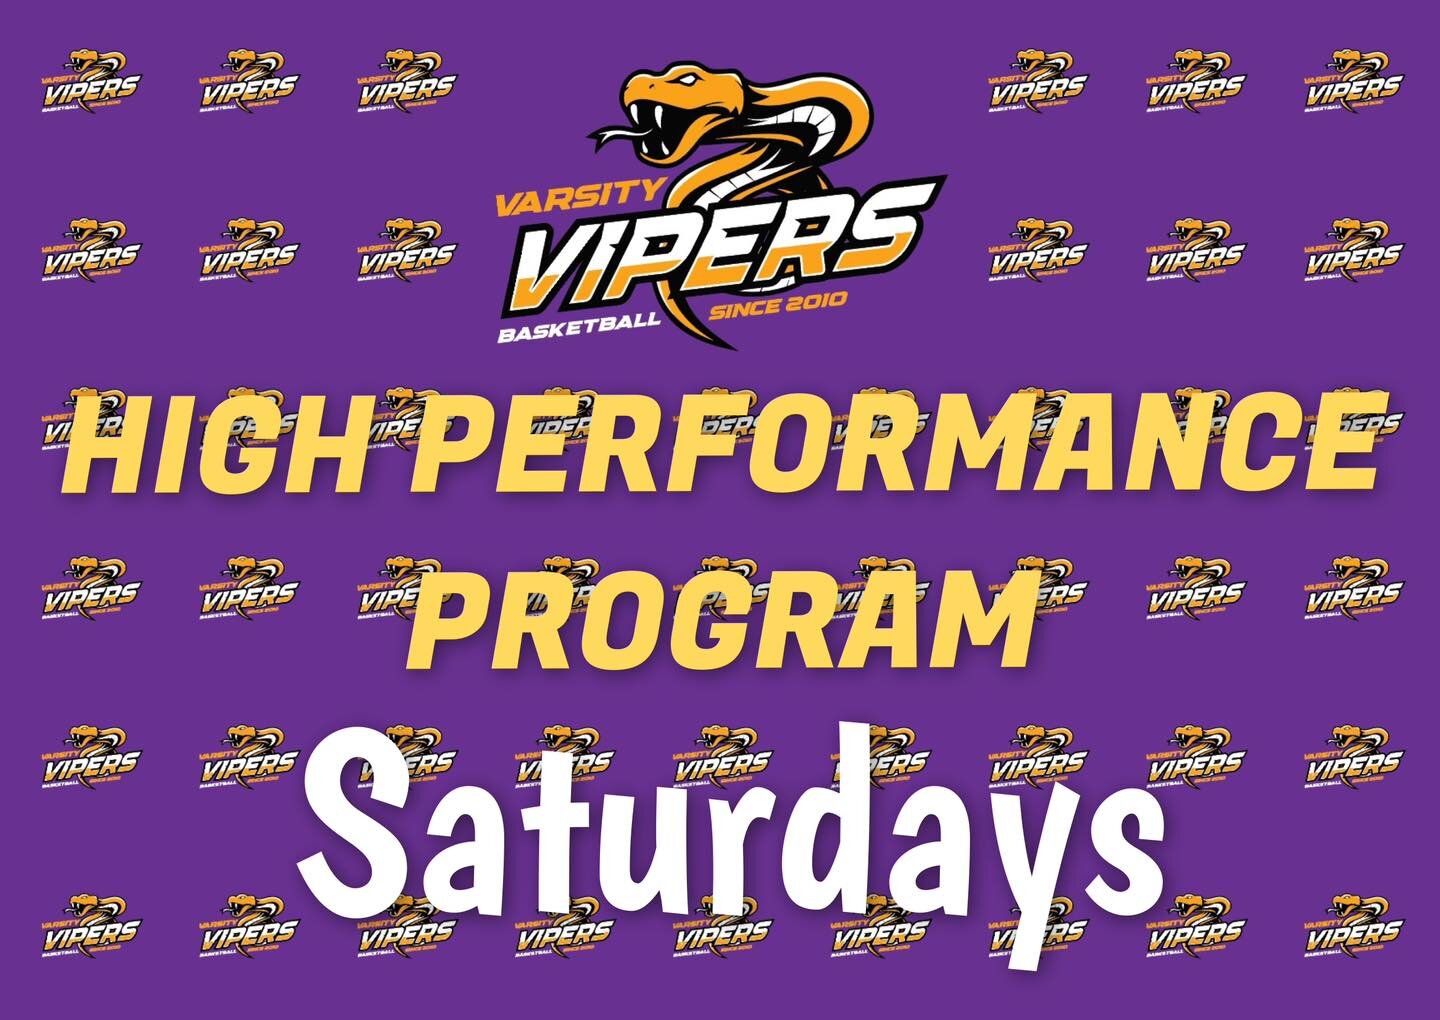 VIPERS HIGH PERFORMANCE SATURDAYS! 🏀

Due to popular demand, our Vipers High Performance Program is back!

Starting this coming Saturday, players can join Coaches Adam Darragh, Scott McGregor and Simon Stevens as they conduct a 1 hour high performan